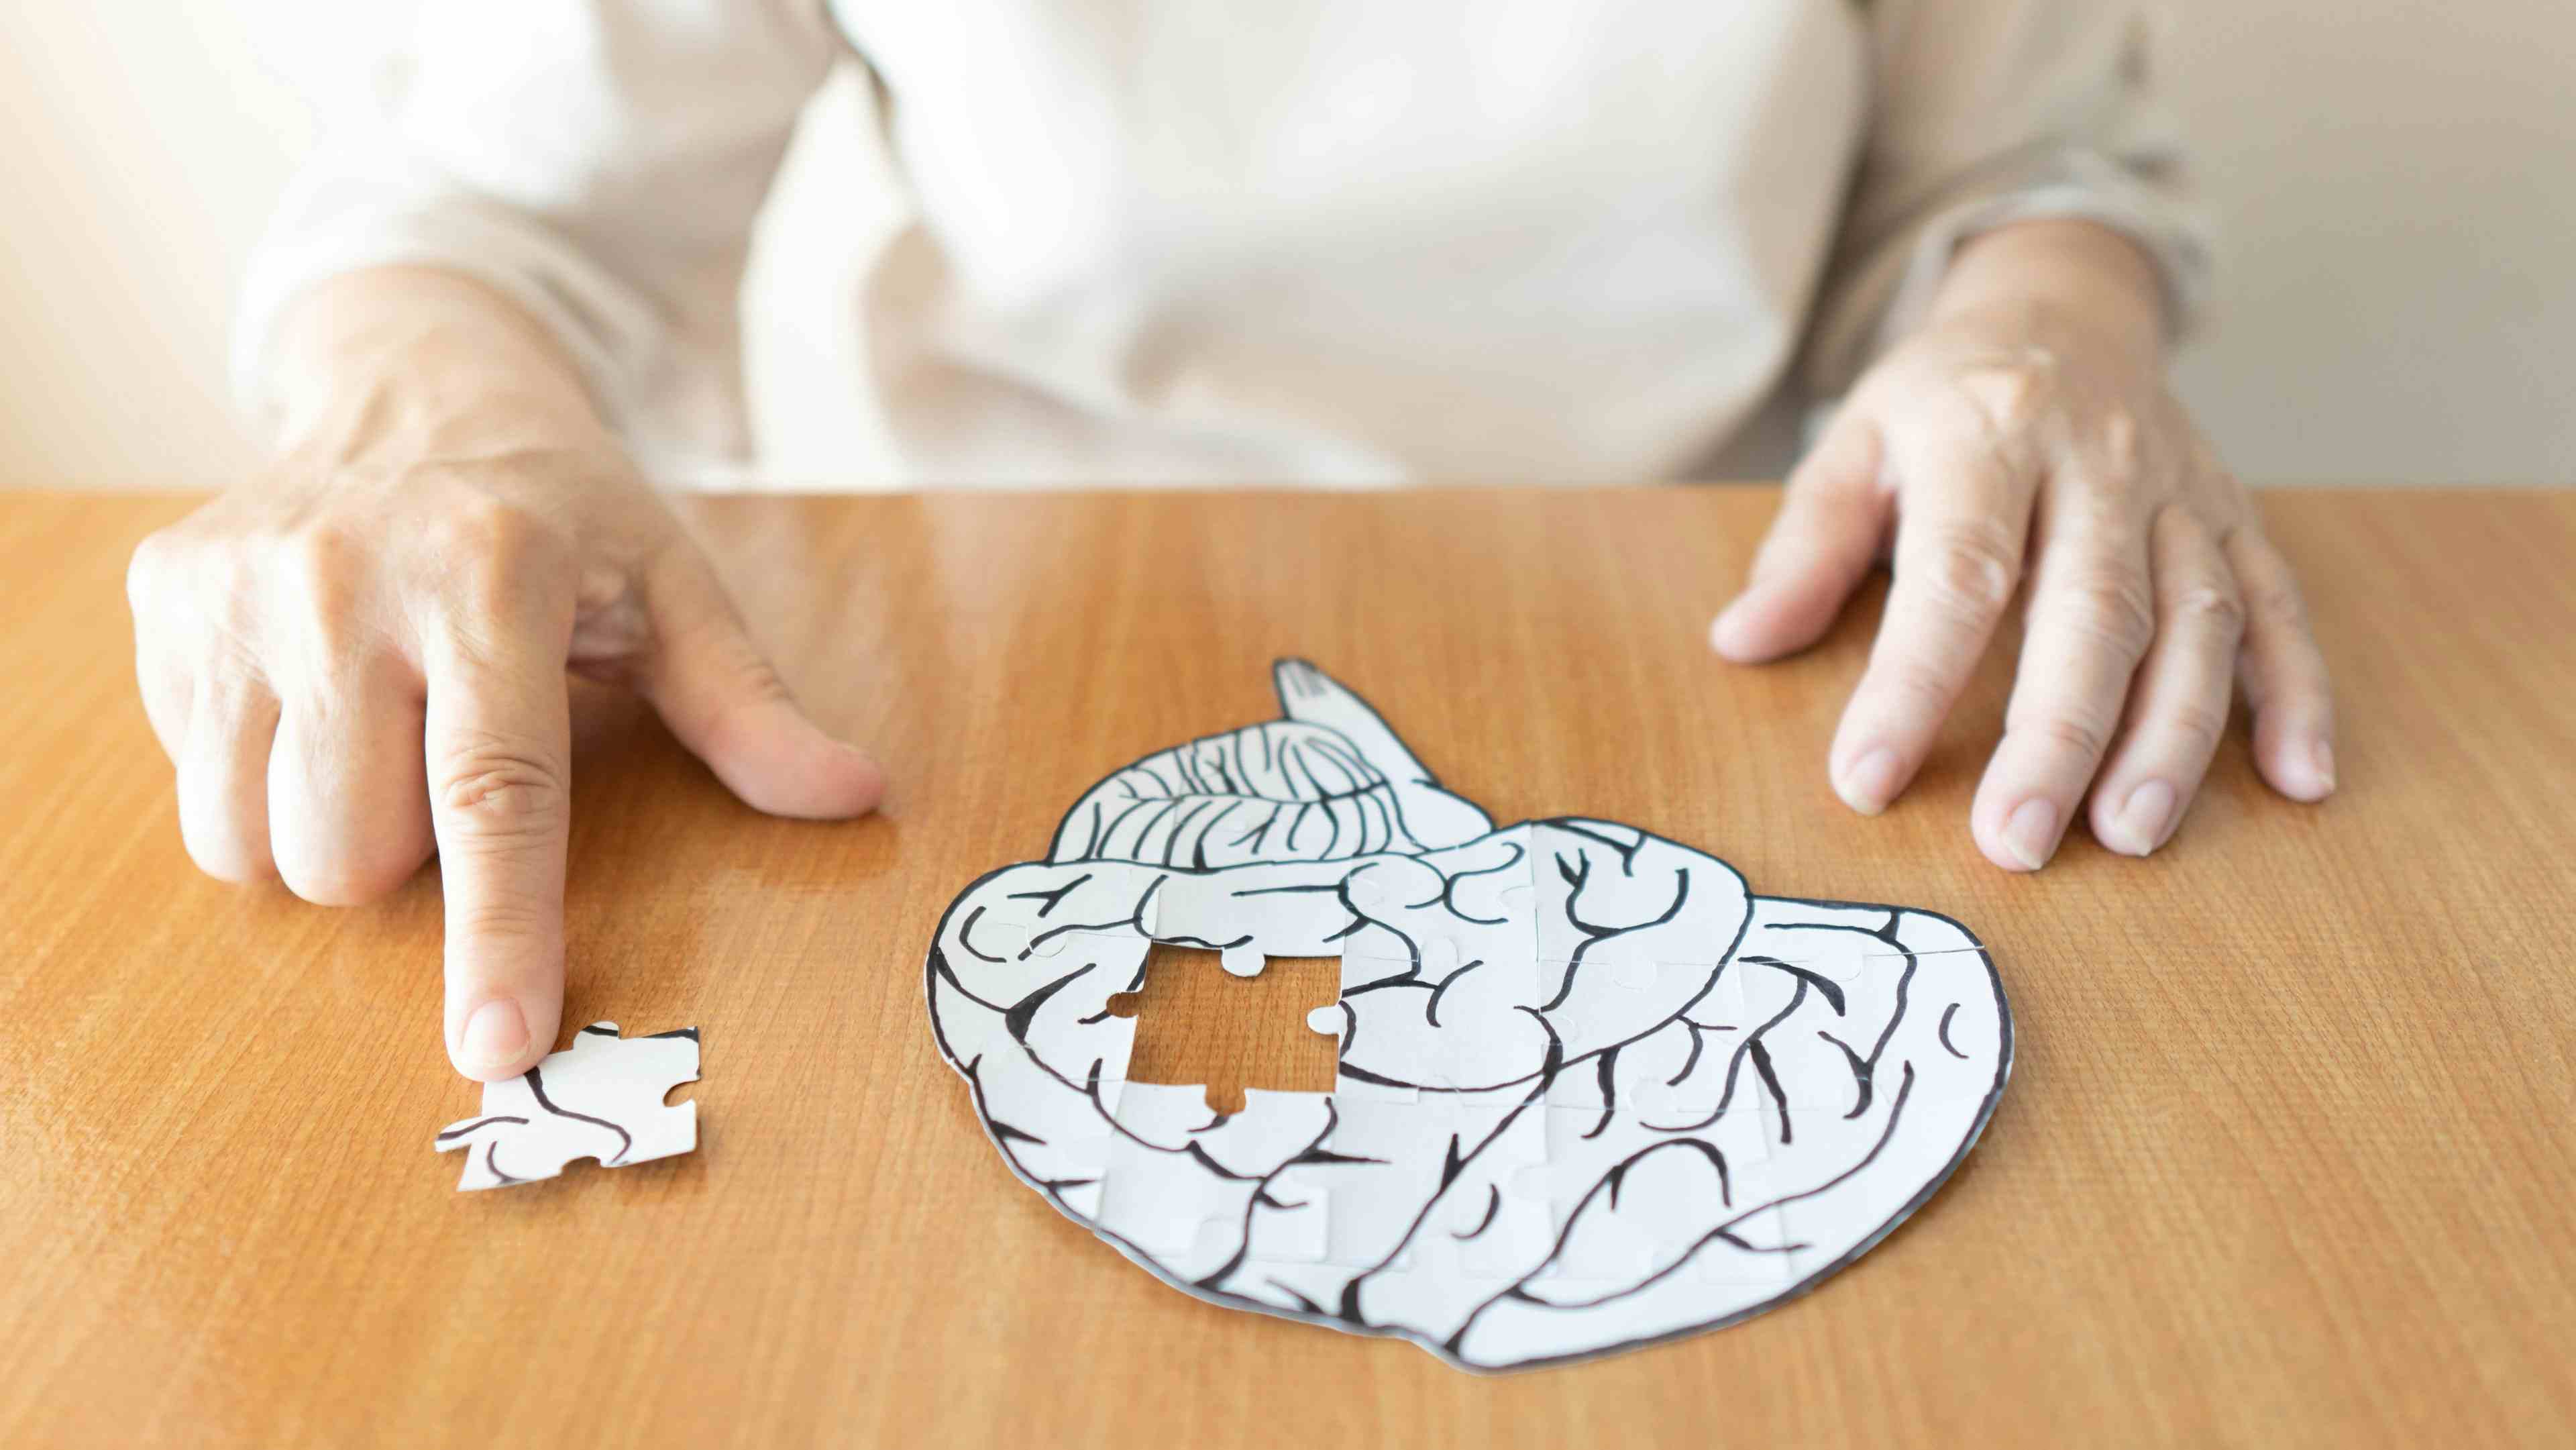 Elderly woman hands putting missing white jigsaw puzzle piece down into the place as a human brain shape | Image credit: Orawan - stock.adobe.com